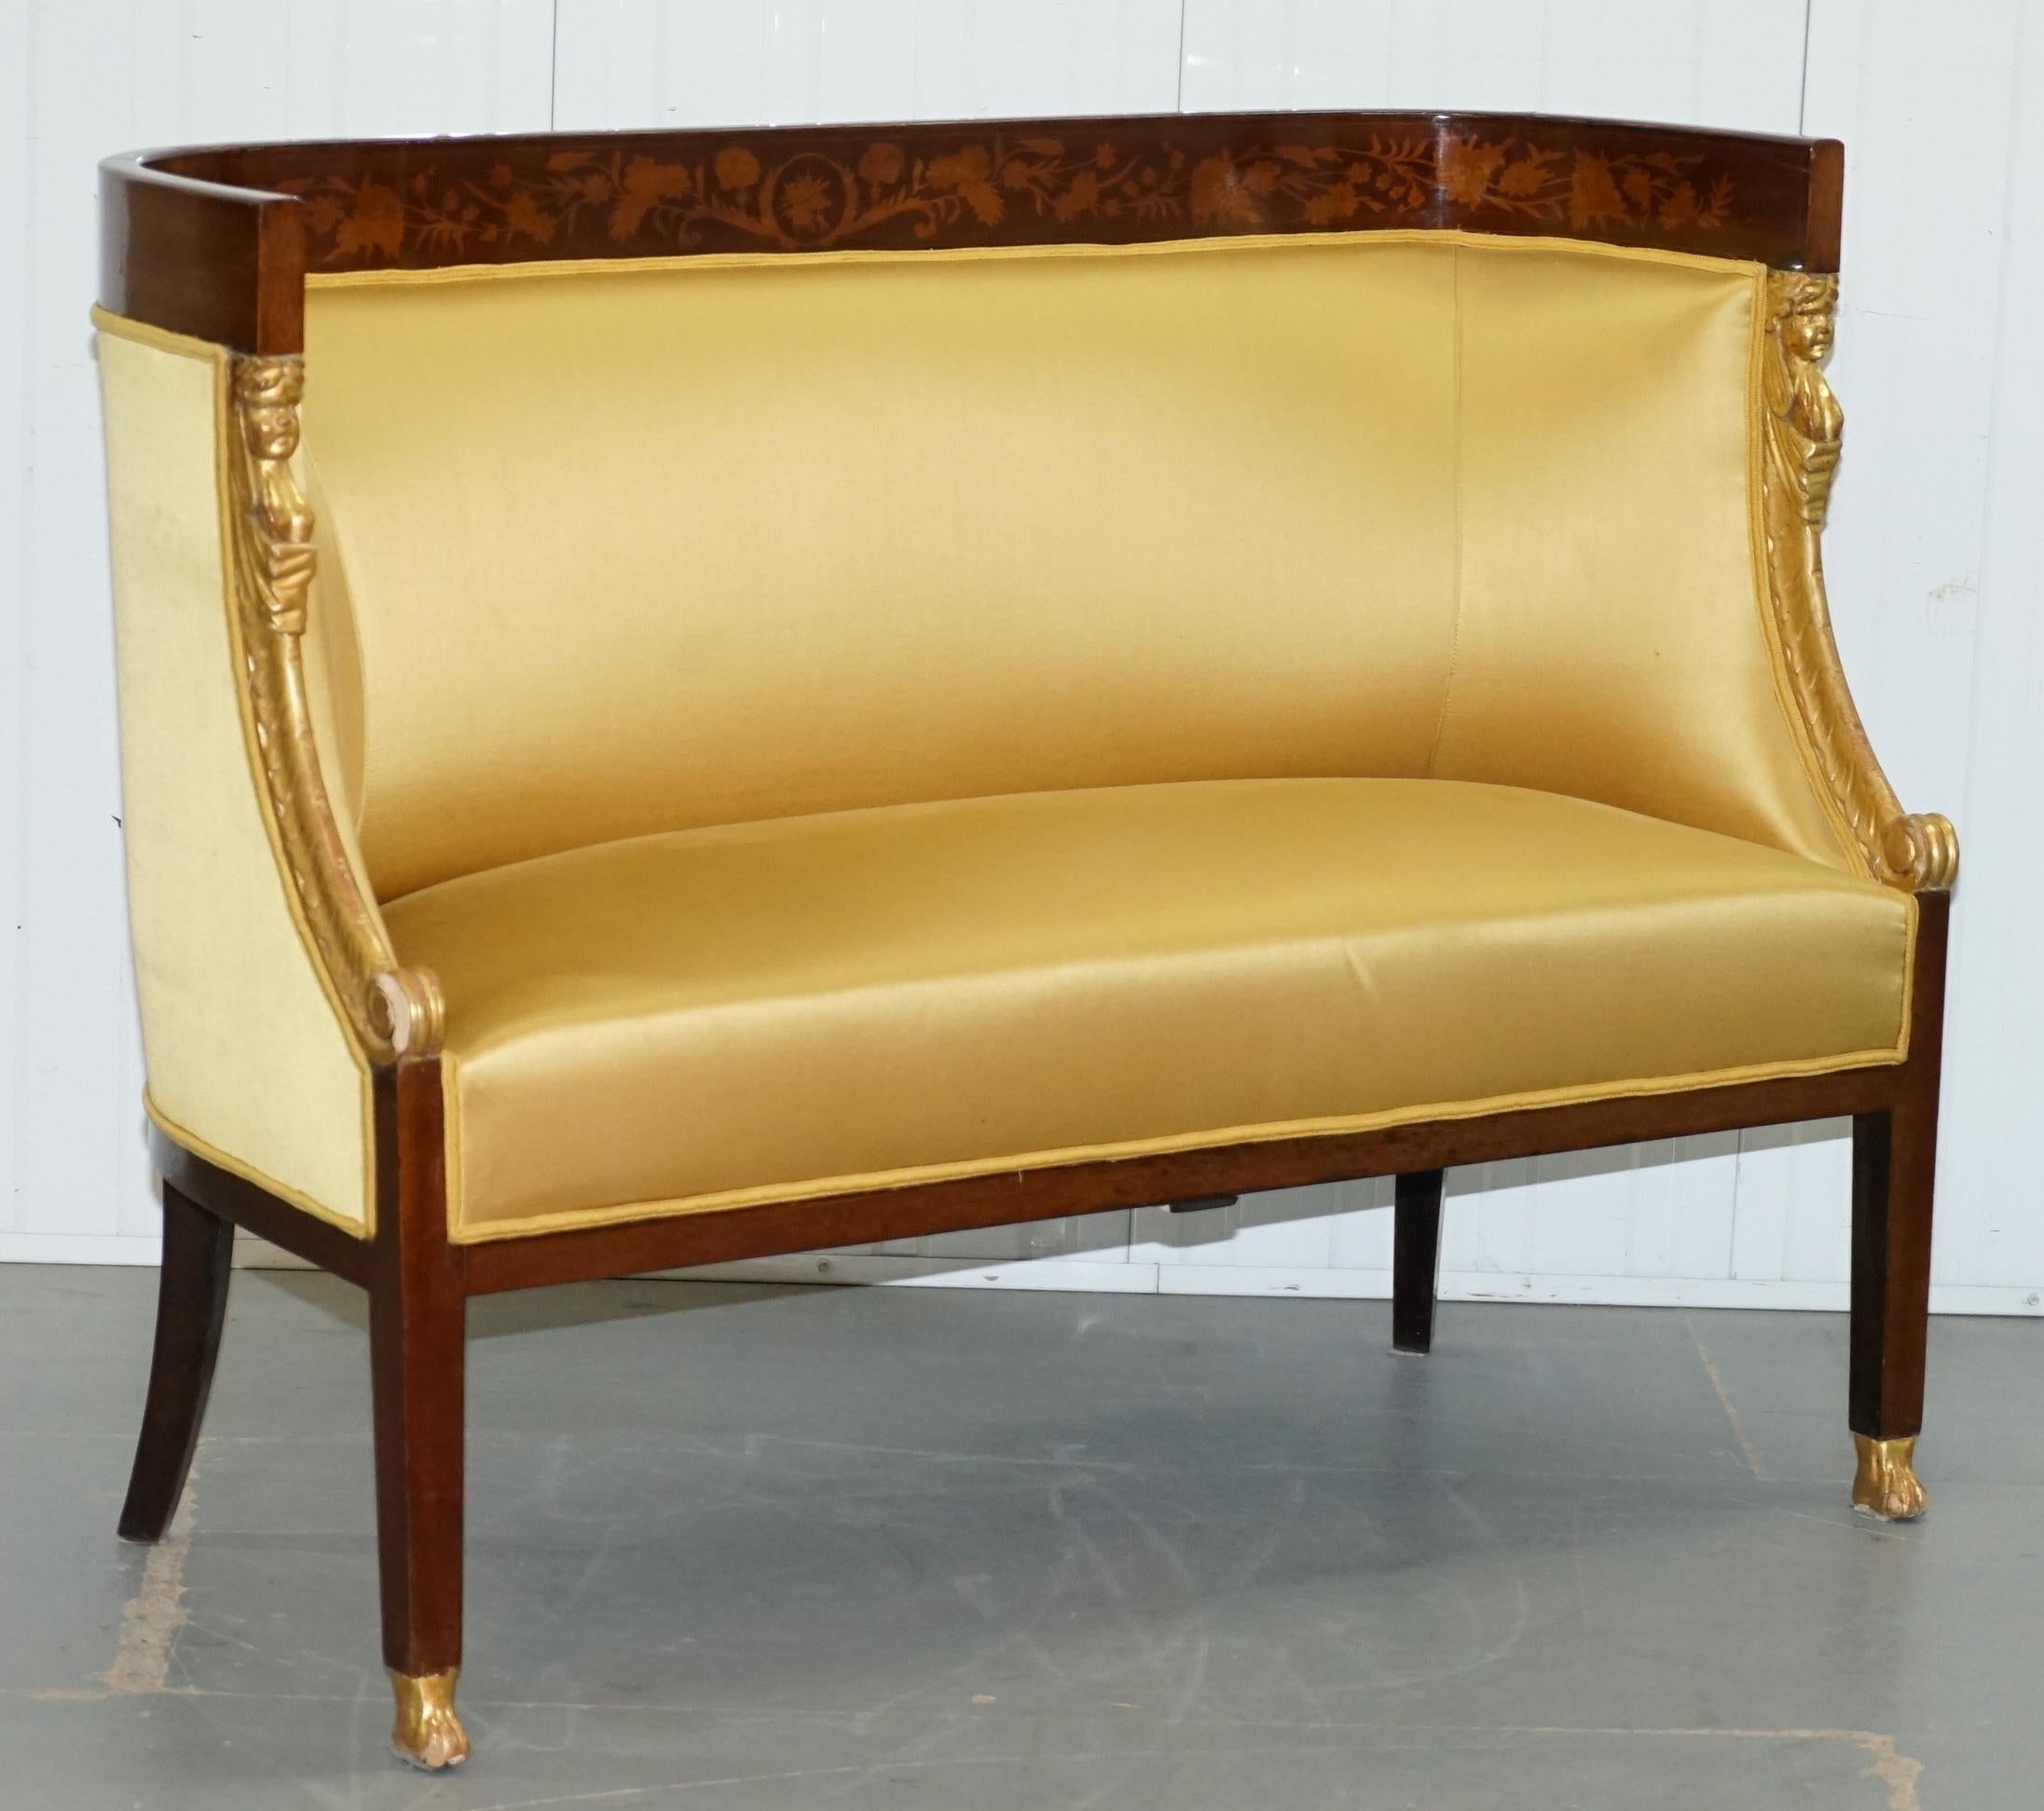 1870 French Empire Marquetry Inlaid Suite Berger Armchairs & Settee Canape, Pair For Sale 10